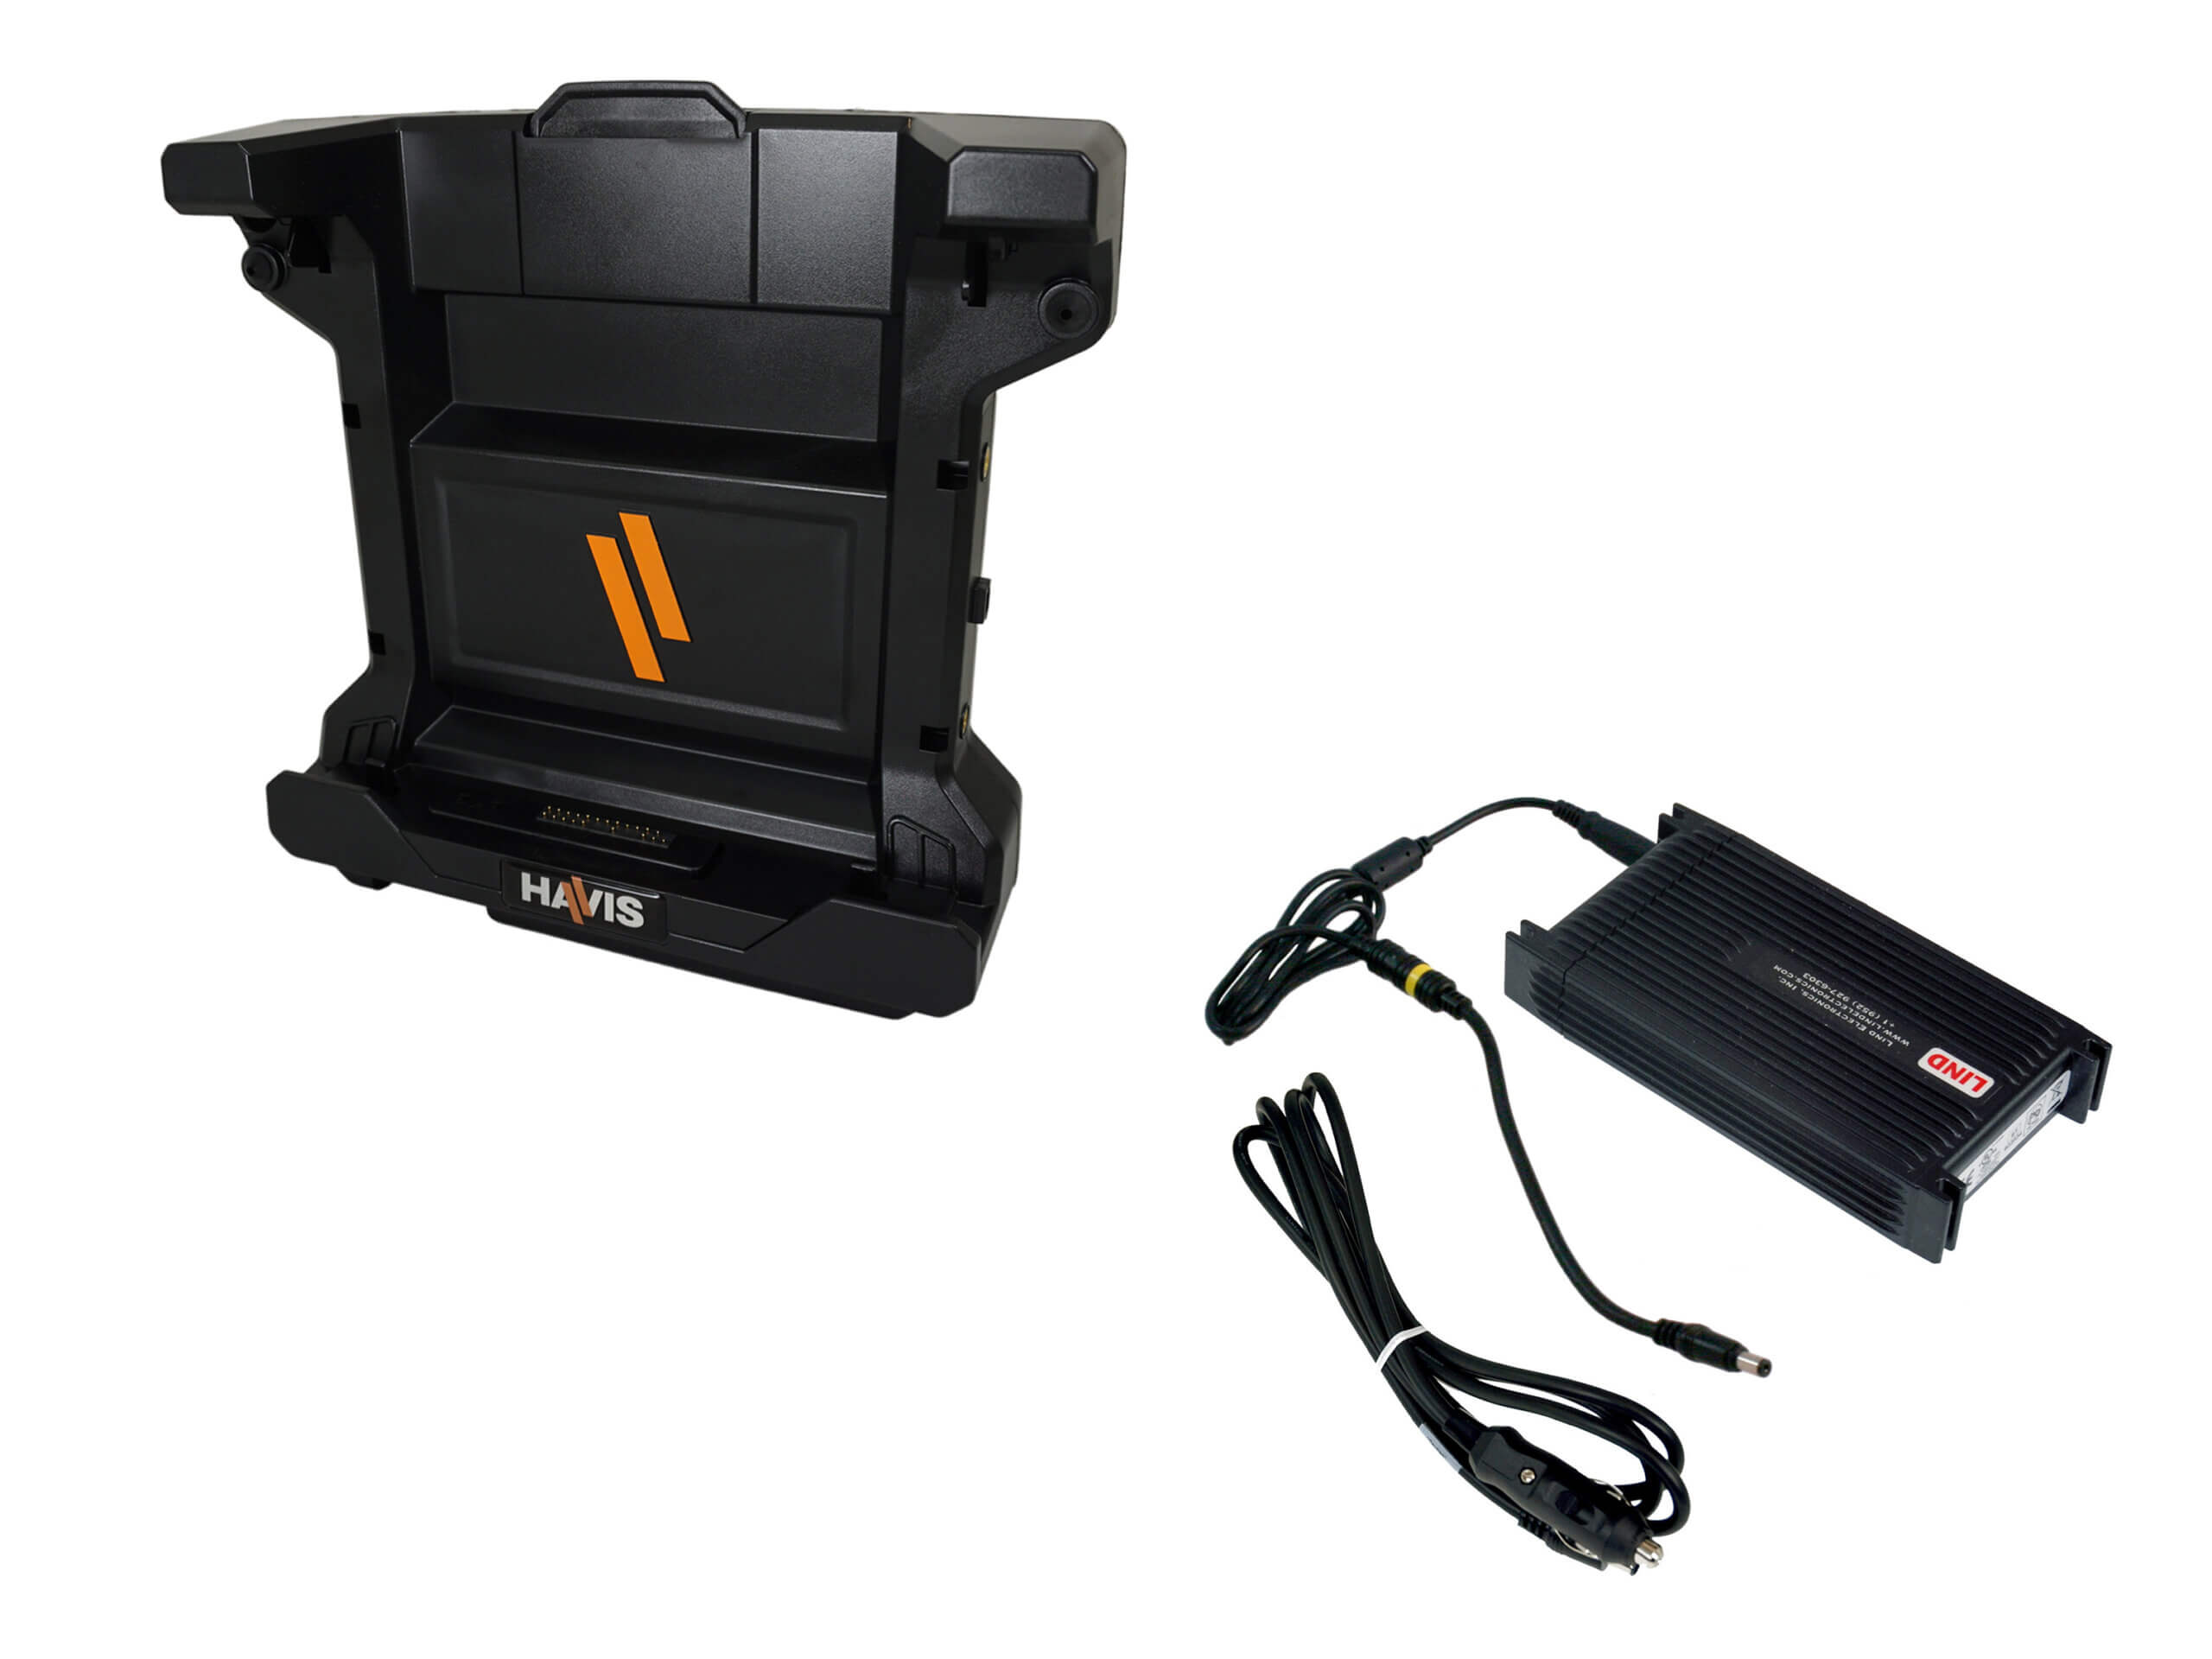 Docking Station with Standard Electronics, Dual Pass-Thru Antenna Connections, and External Power Supply for Dell Latitude Rugged 12″ Tablets (7220, 7212)